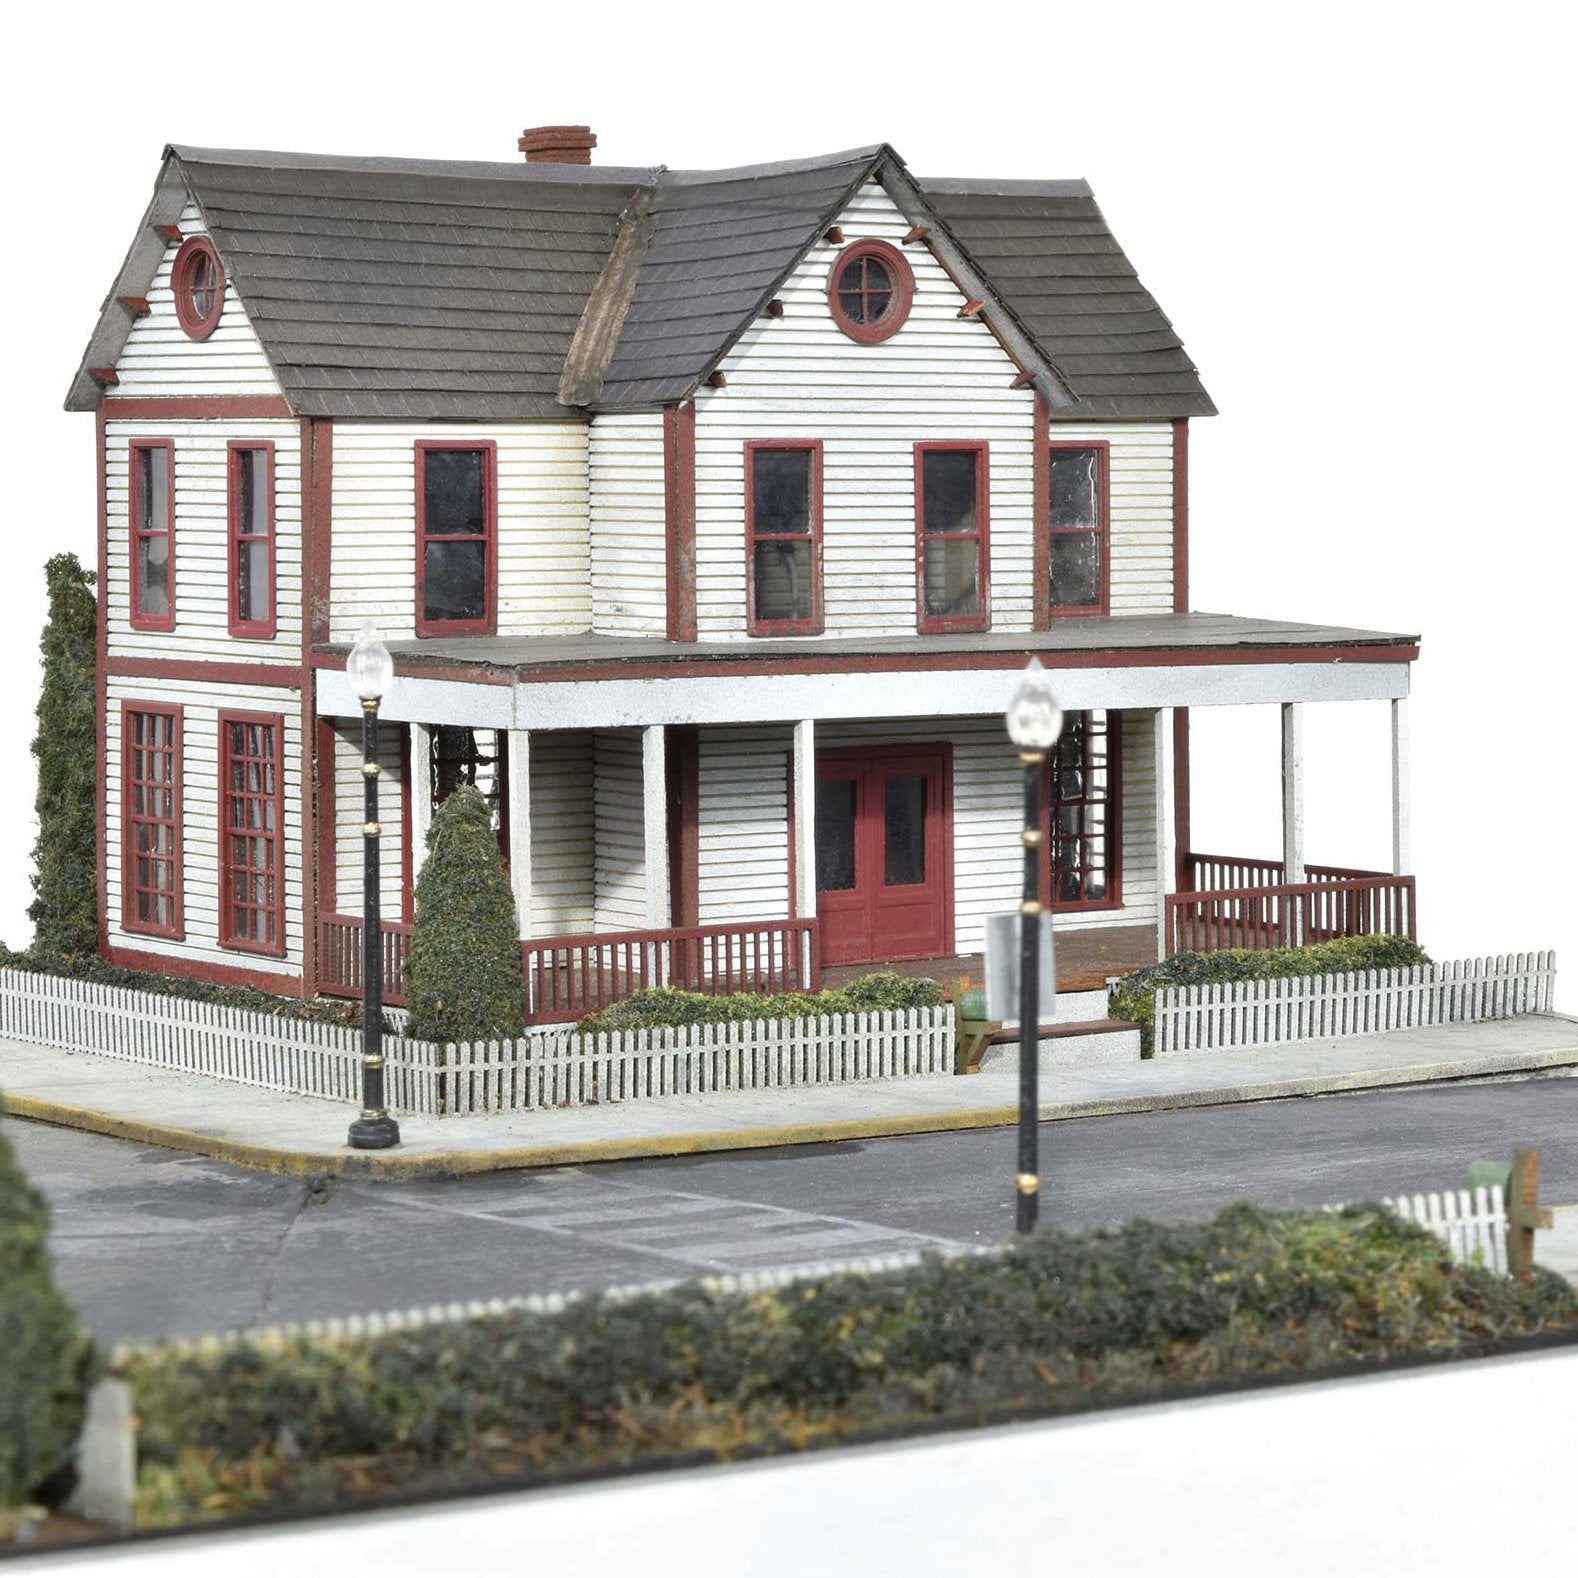 Parson's Home, HO Scale, By Scientific